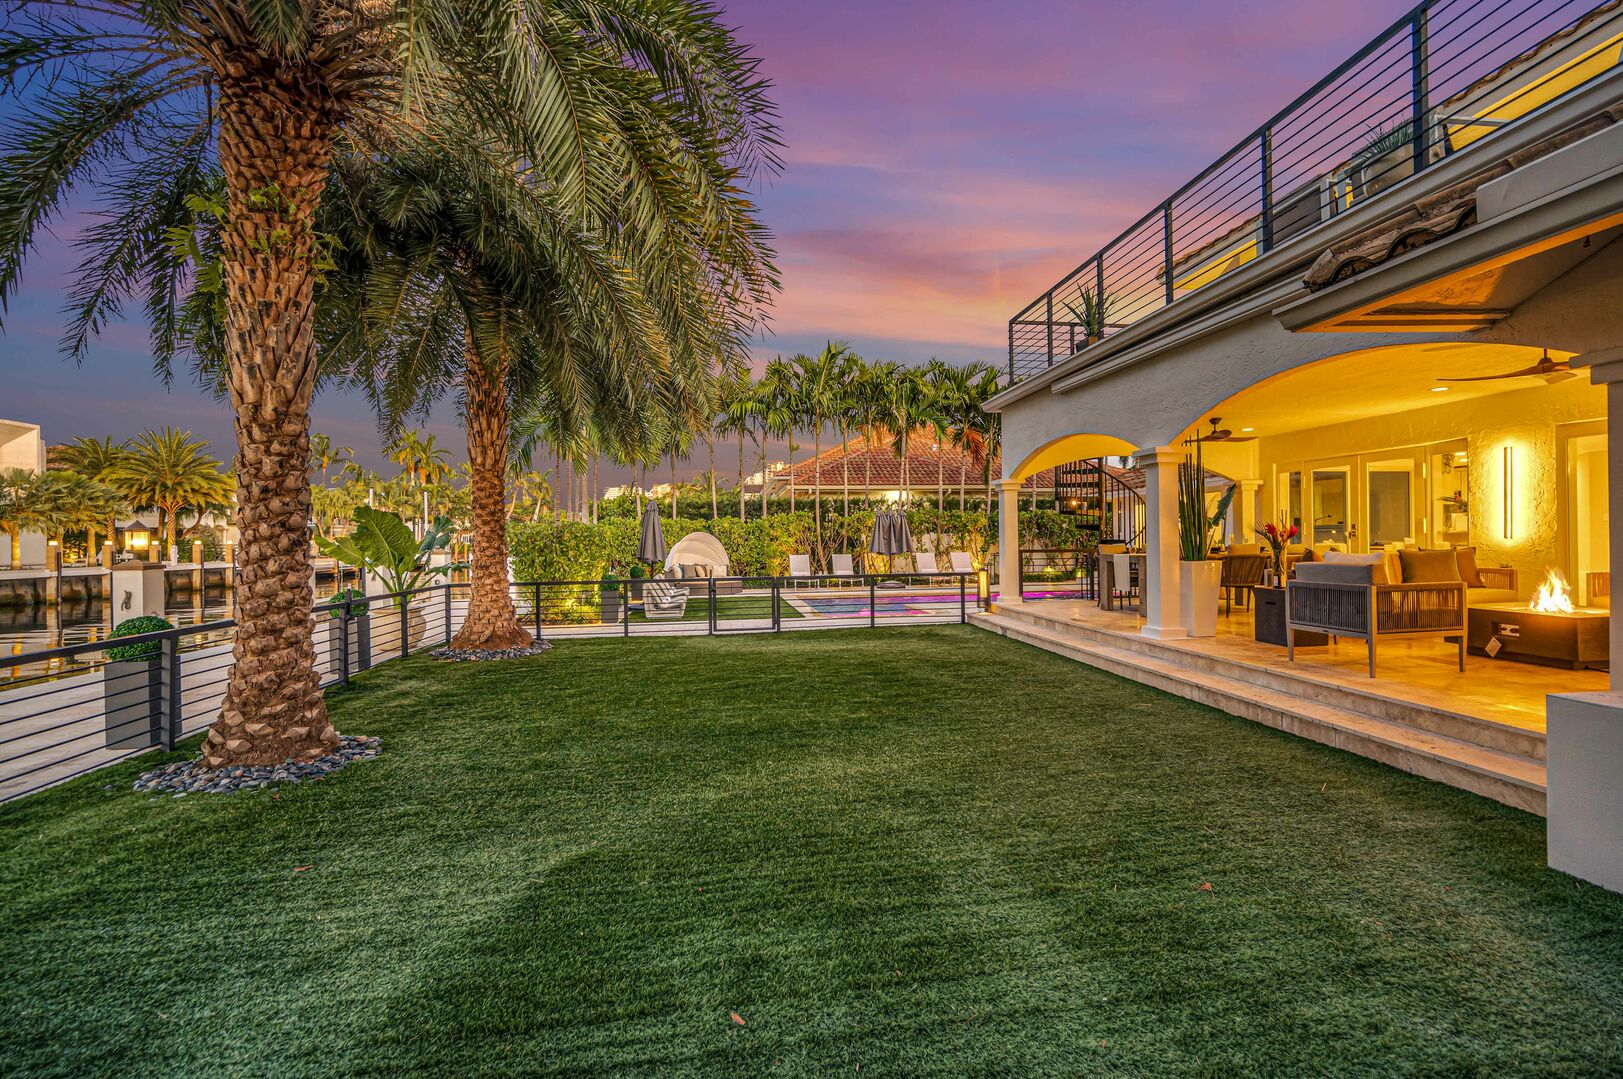 Relish in waterfront tranquility from the back yard with its dining and lounge areas.